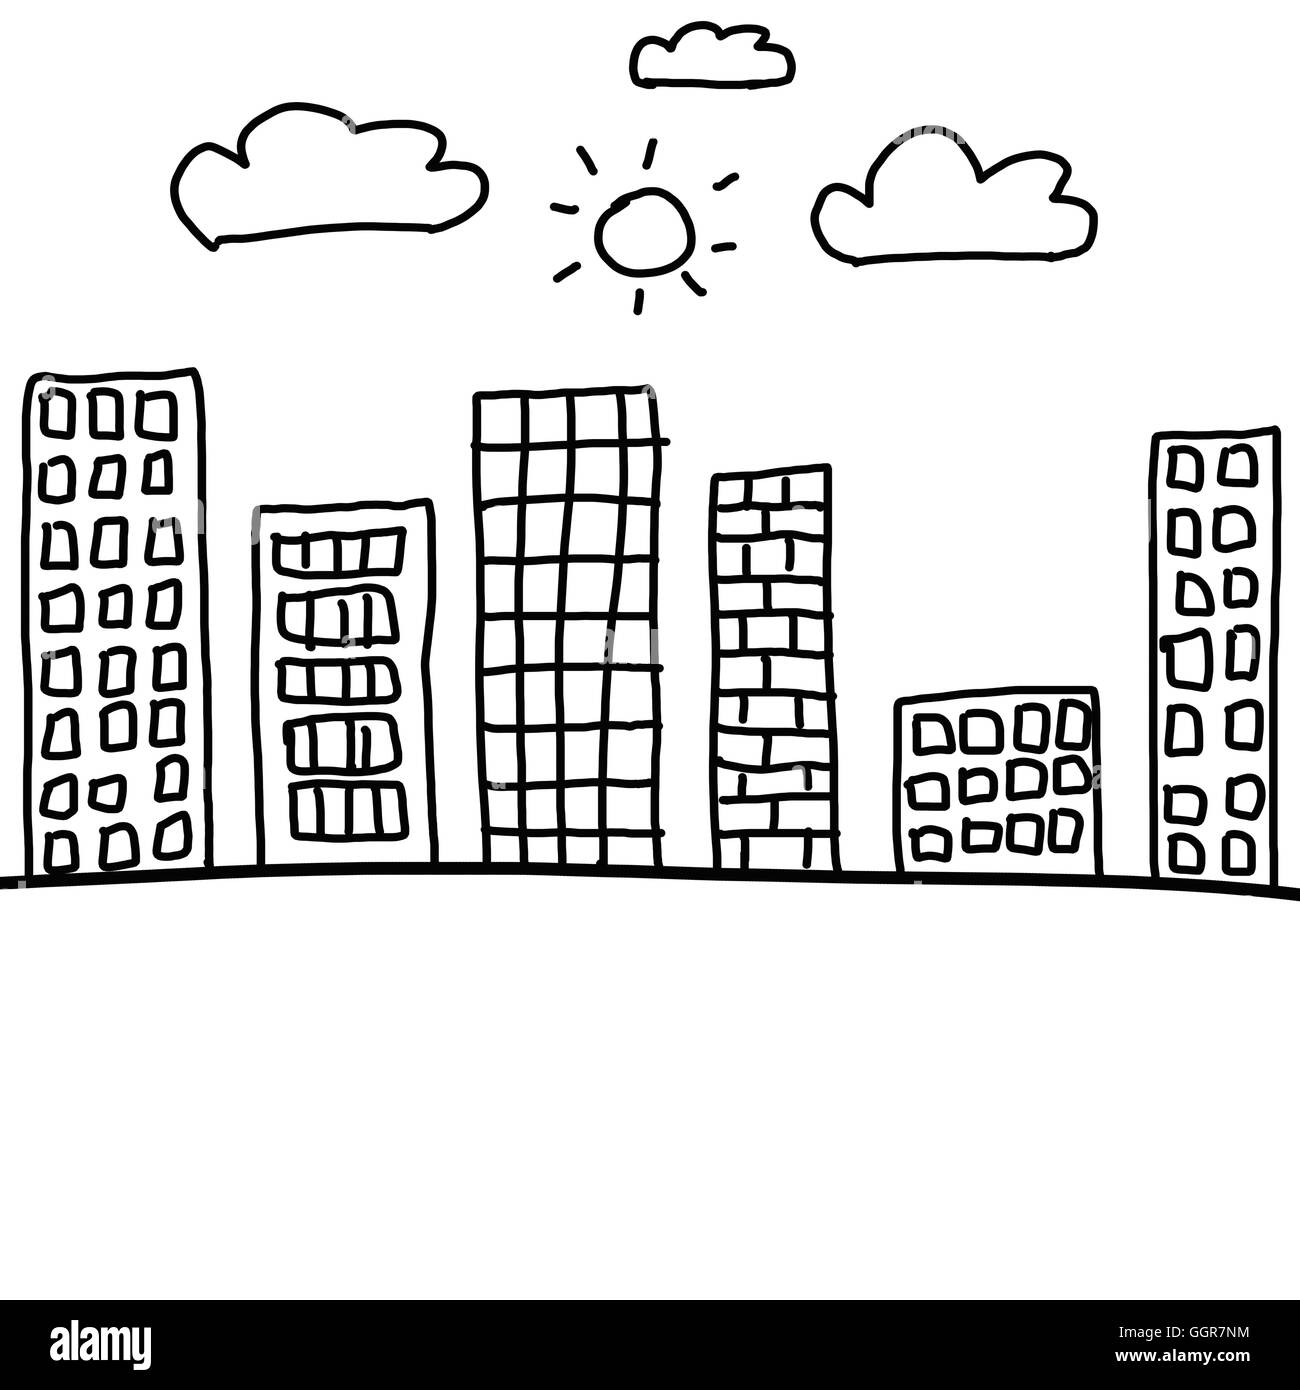 City in hand drawn design idea,format of line pattern art on white background. Stock Photo